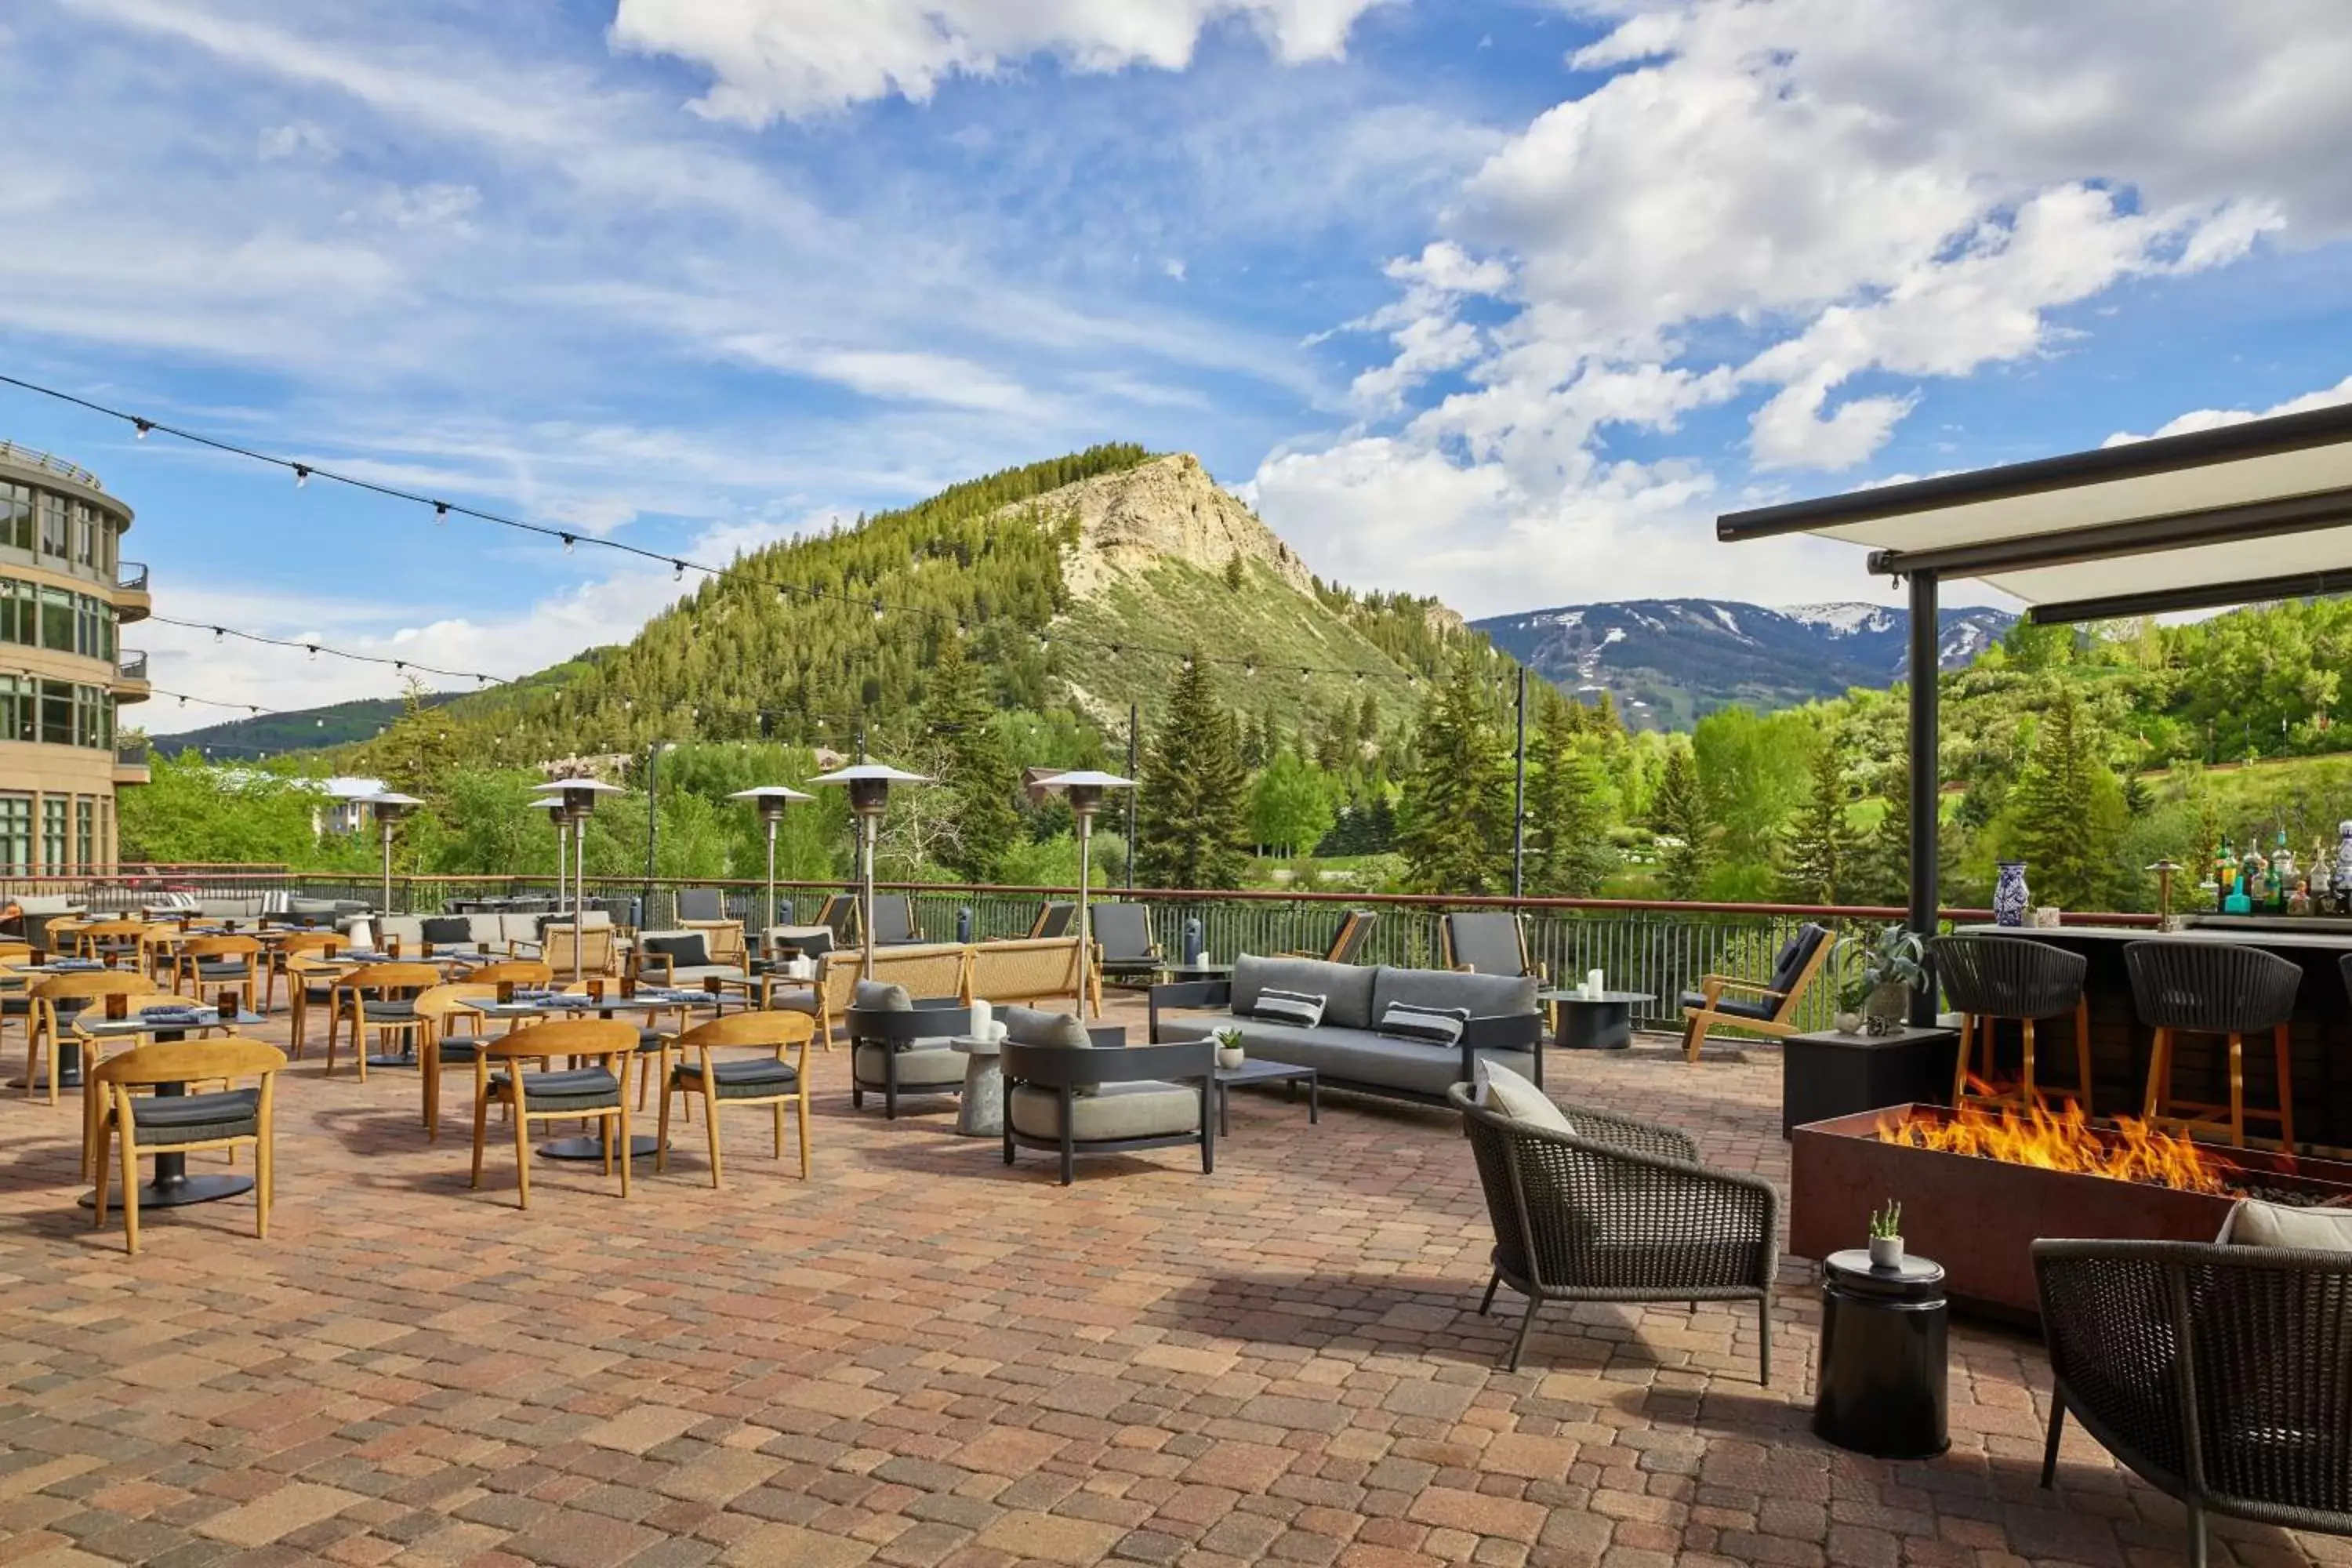 Restaurant/places to eat in The Westin Riverfront Resort & Spa, Avon, Vail Valley